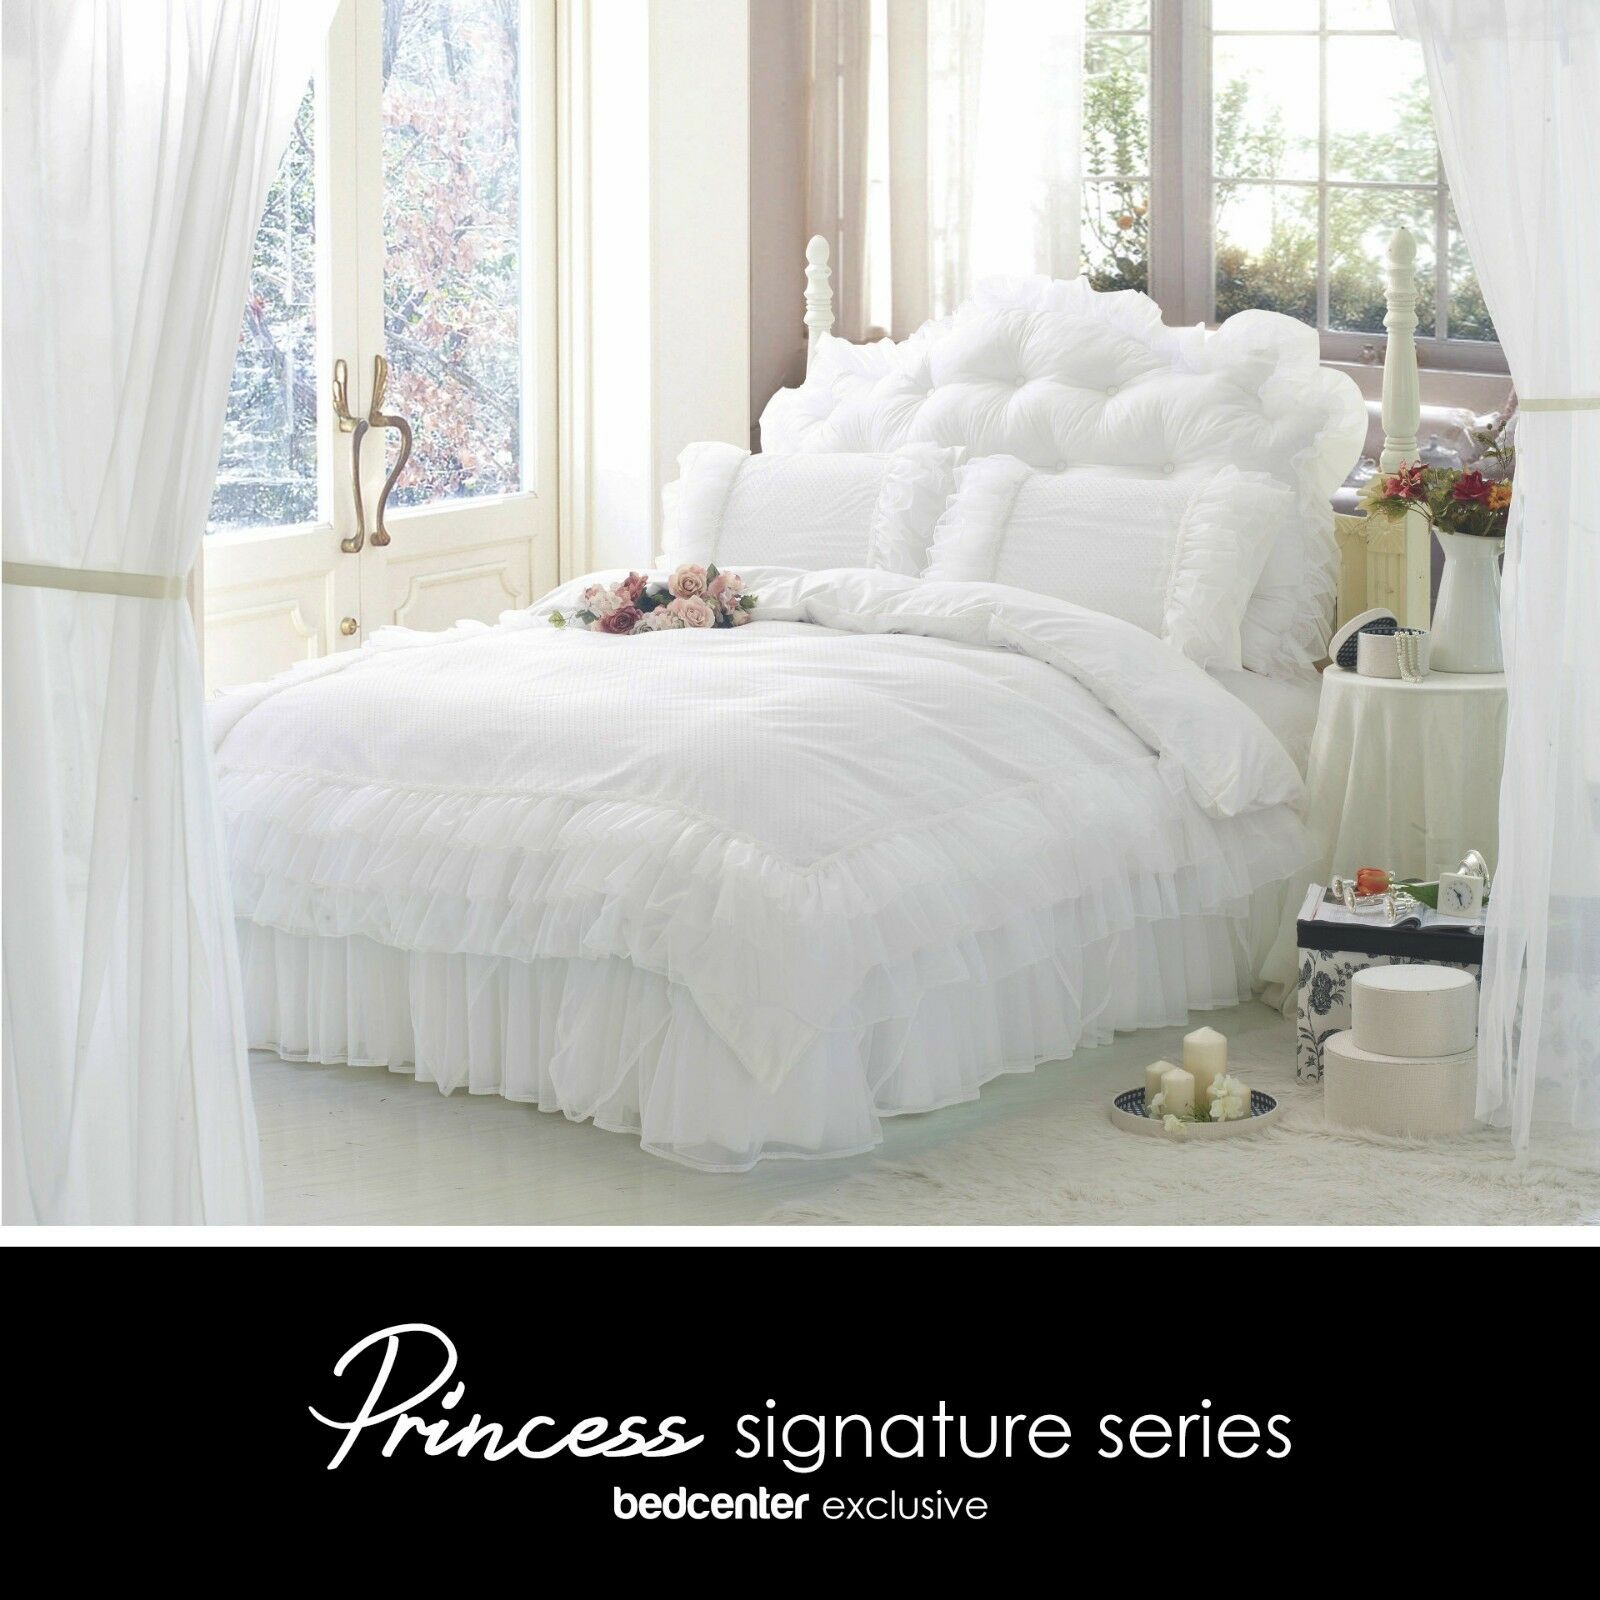 Bedding Set Full Twin Size Bed Sheet Mattress Cover WithLace